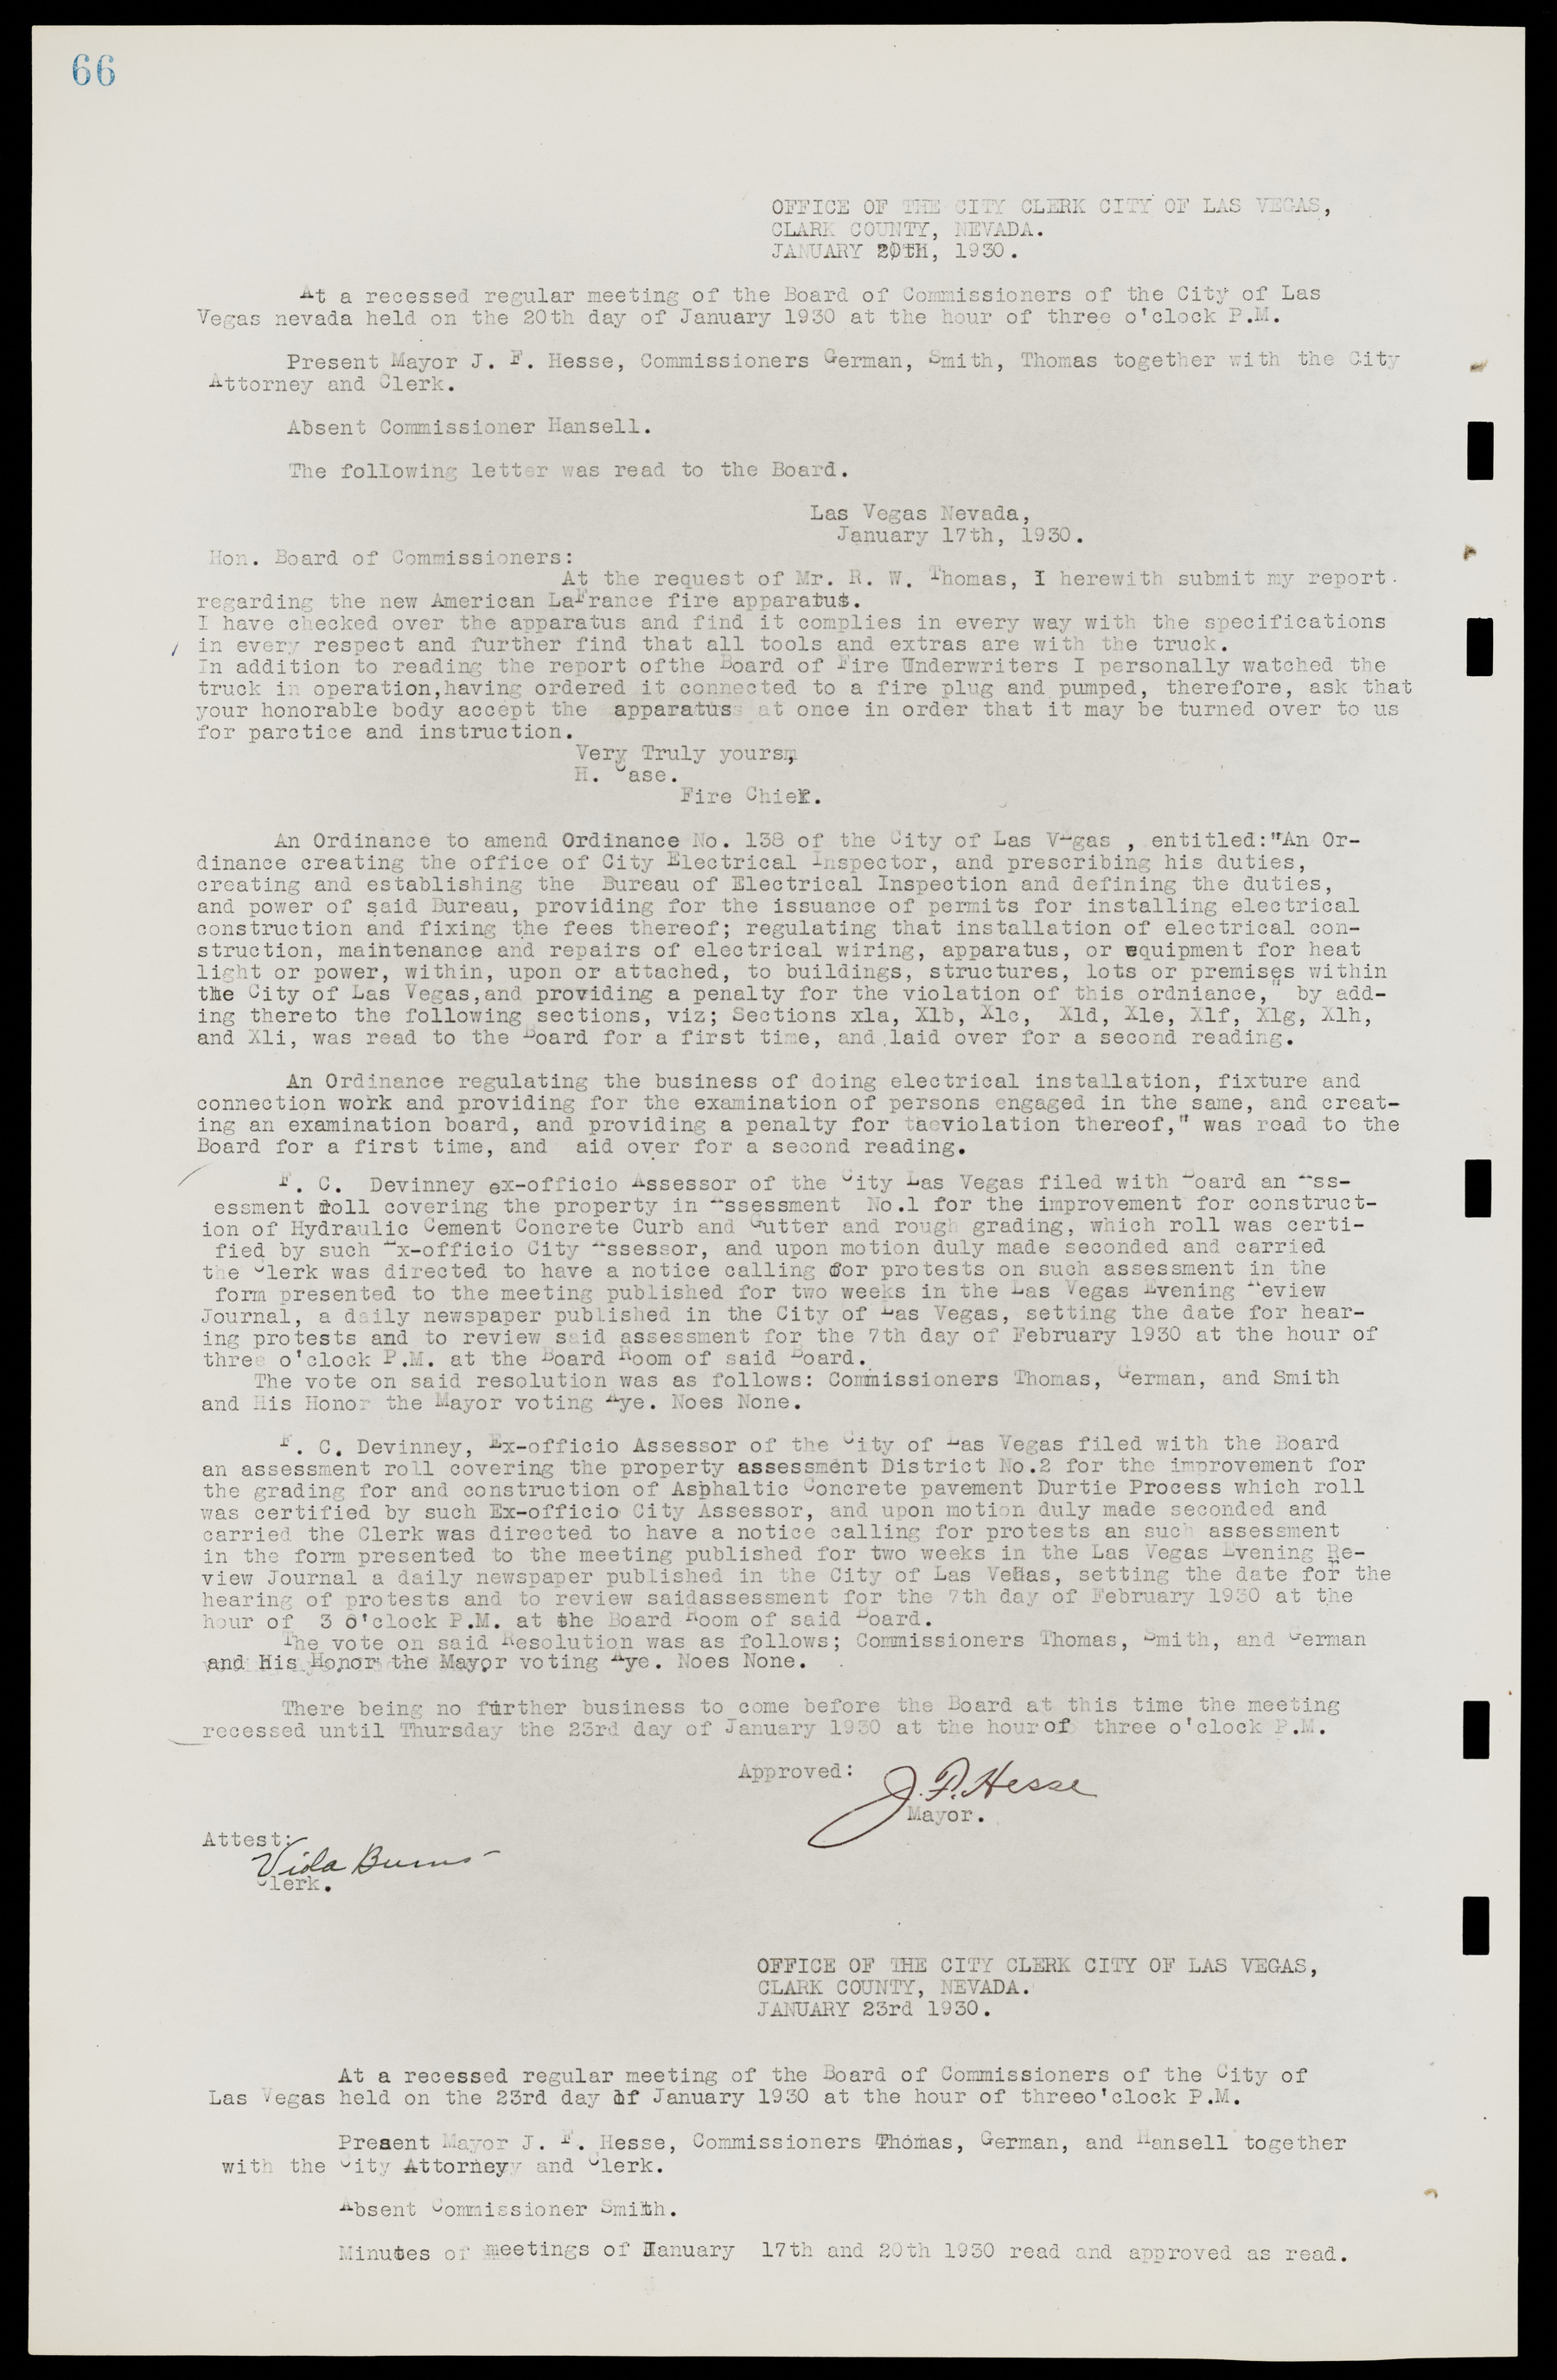 Las Vegas City Commission Minutes, May 14, 1929 to February 11, 1937, lvc000003-72